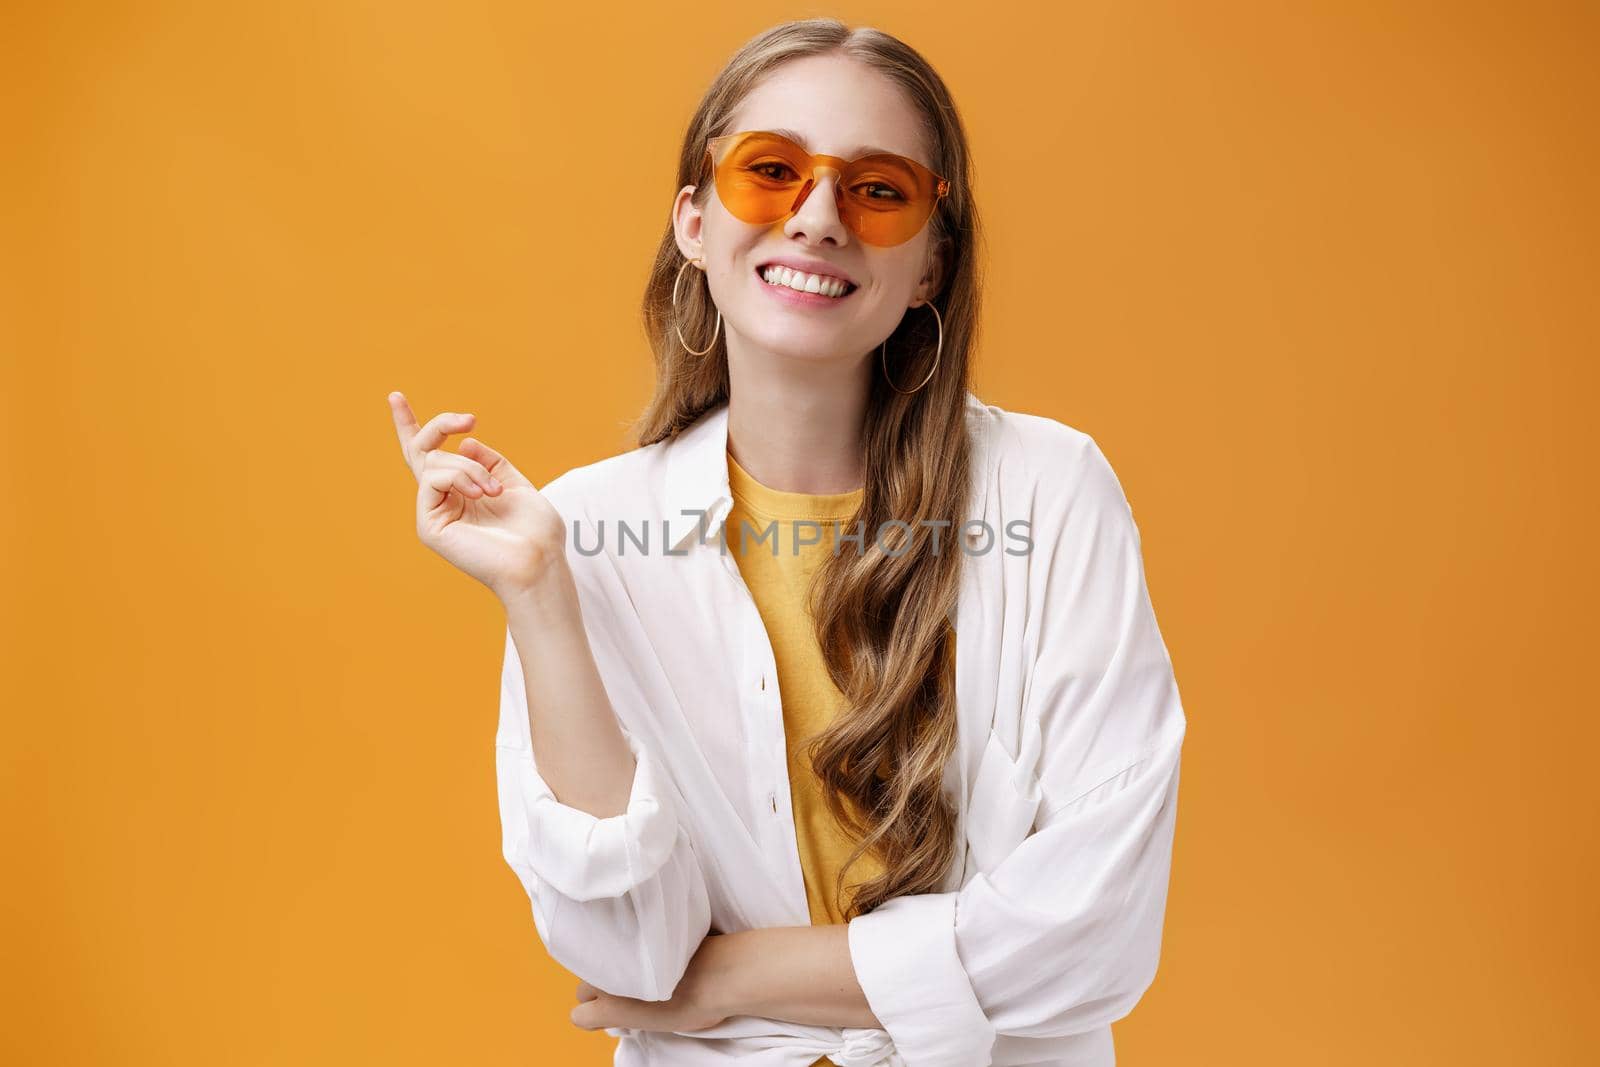 Sunglasses matching style. Portrait of confident and carefree good-looking female fashion blogger in eyewear and white t-shirt gesturing with raised hand and smiling cheerfully at camera.